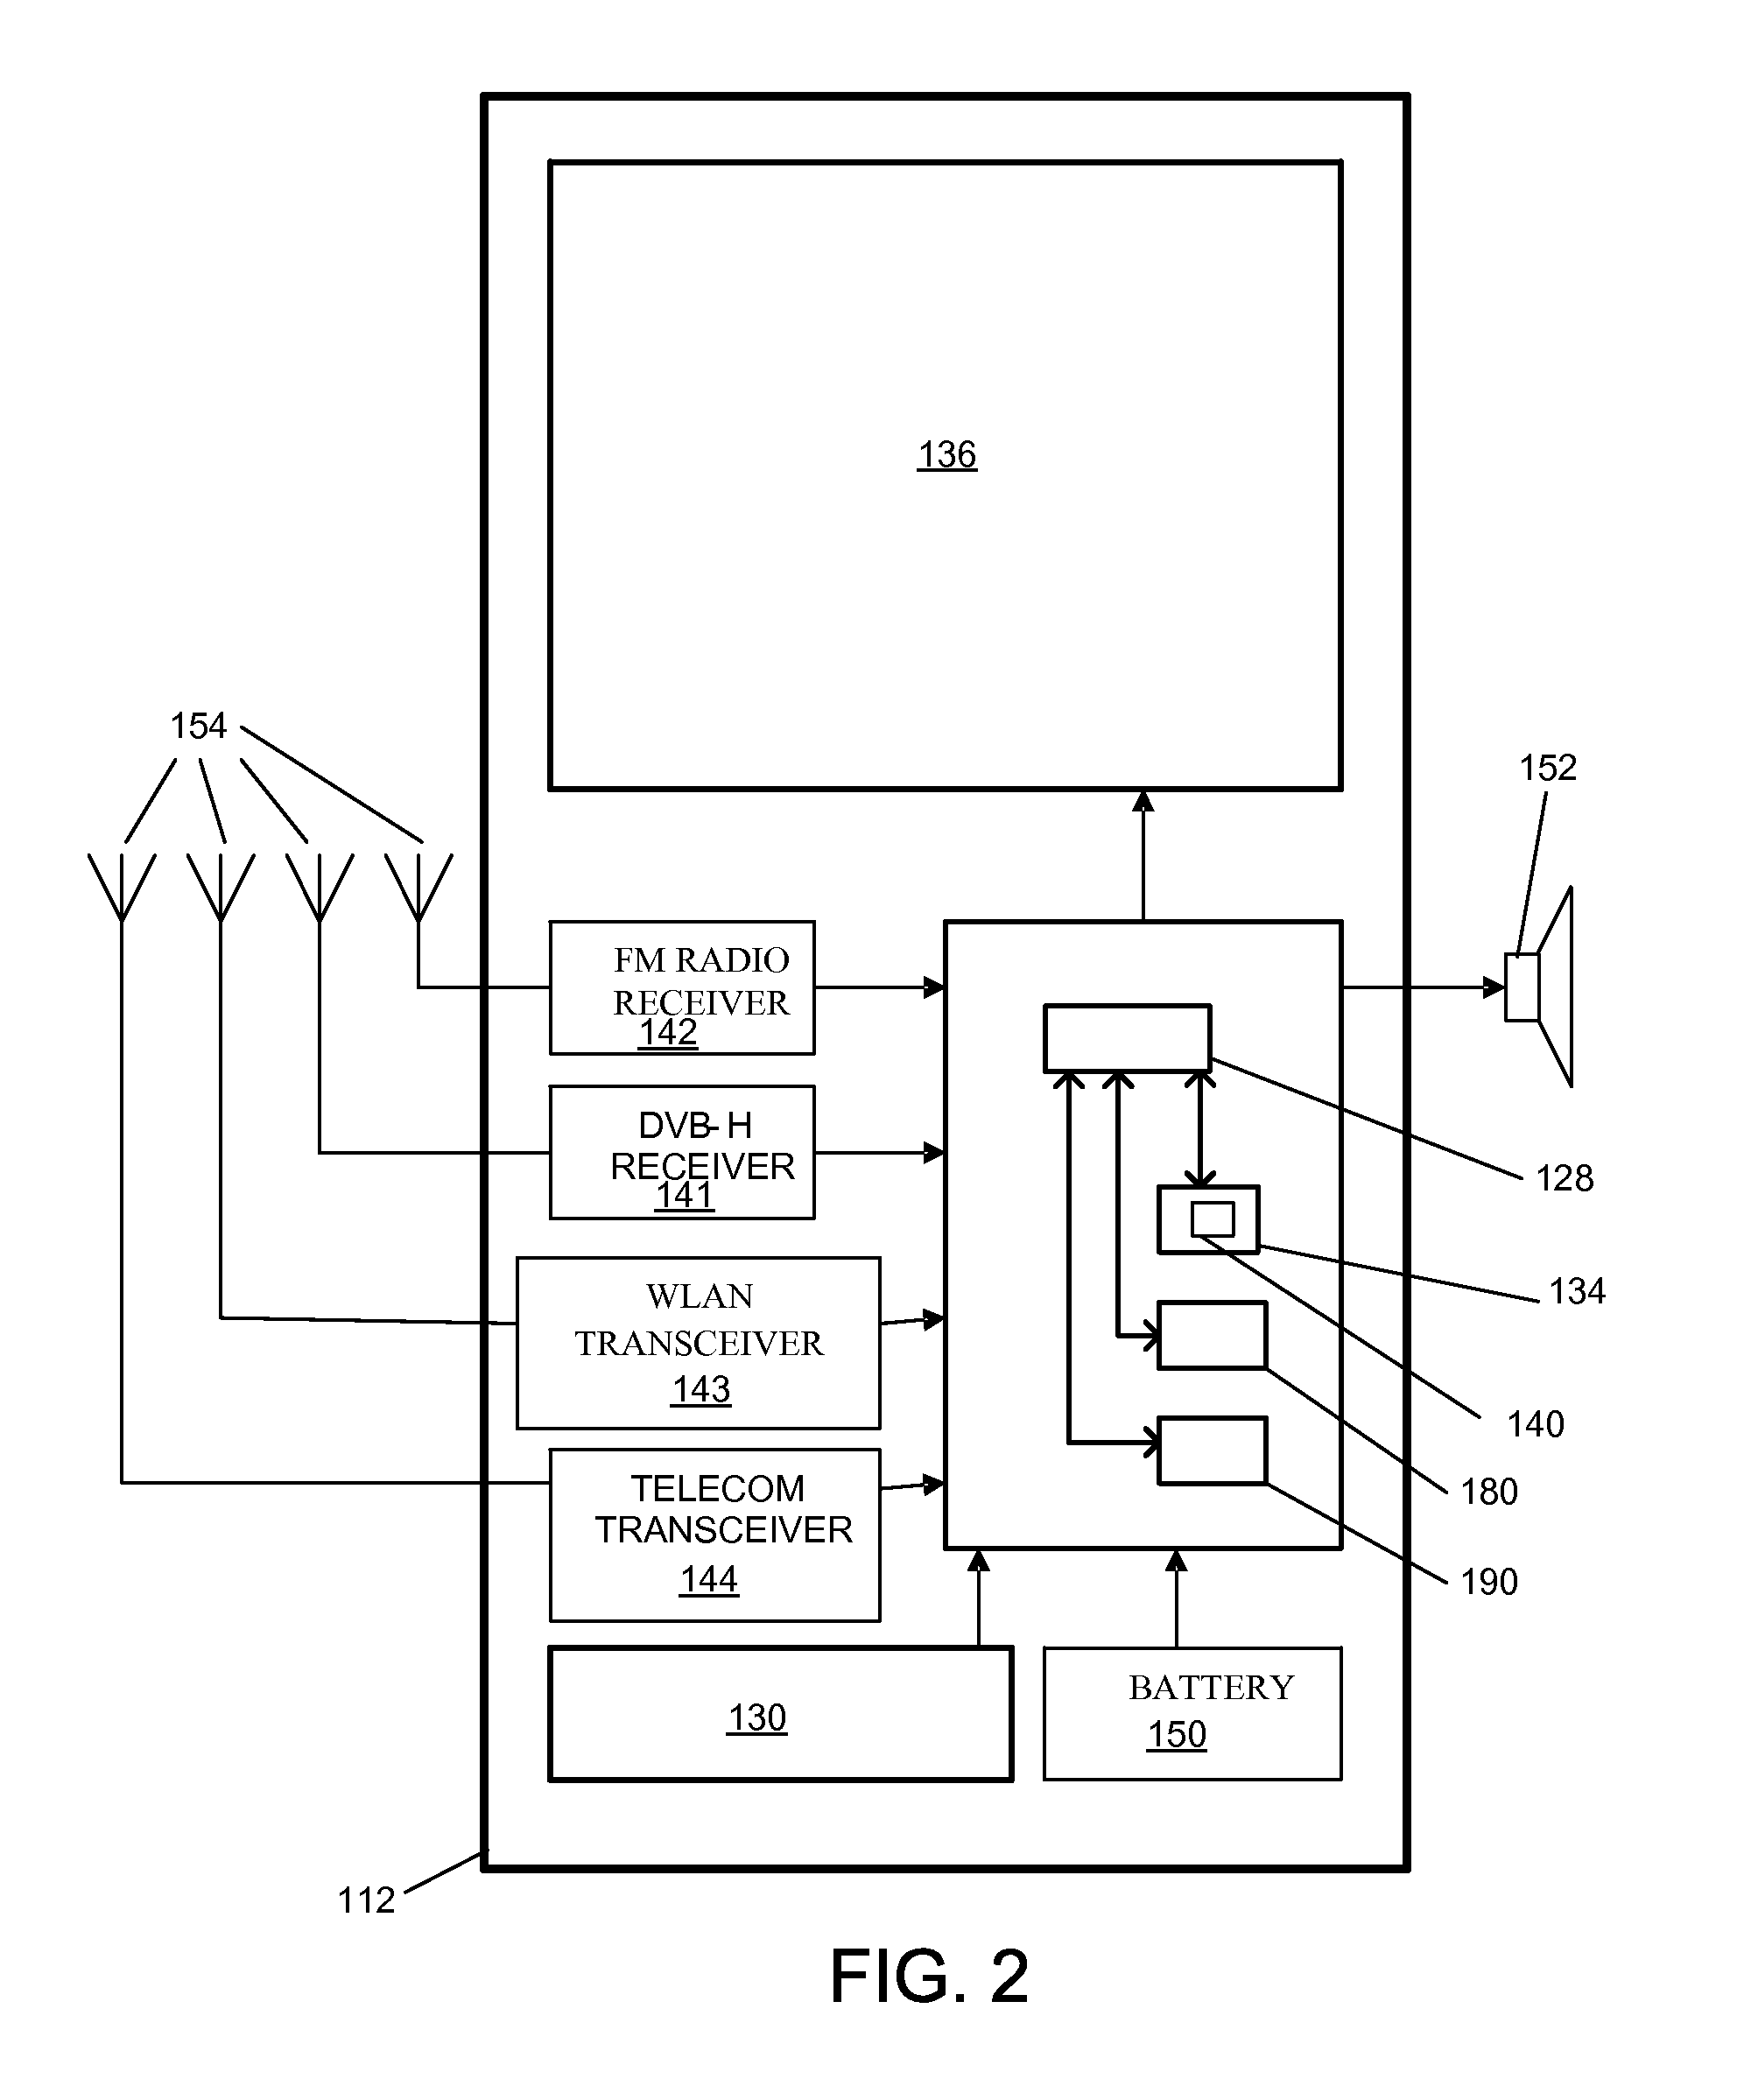 Enhanced signaling of pre-configured interaction message in service guide